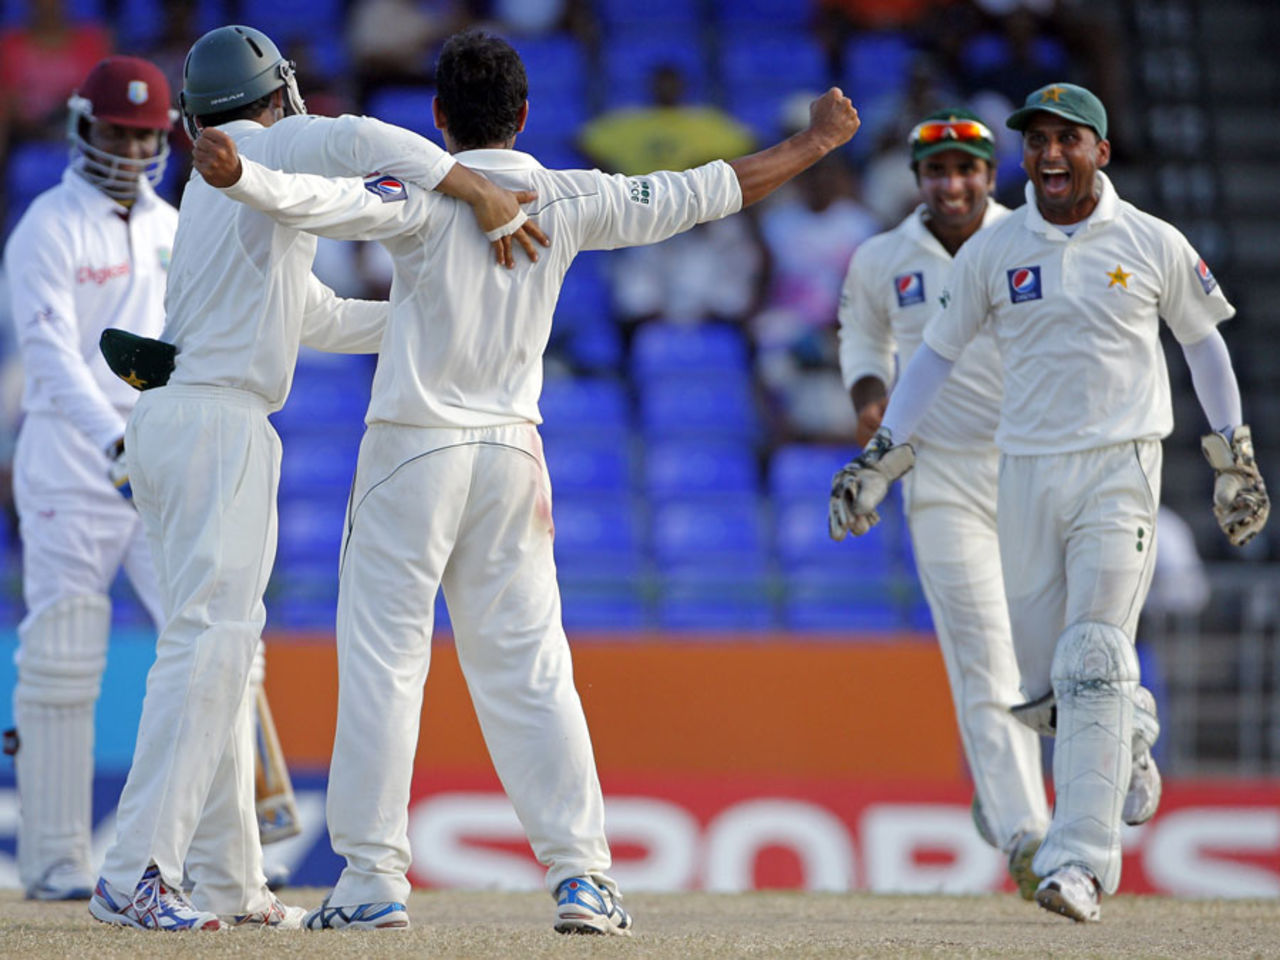 Pakistan celebrate Marlon Samuels' exit, West Indies v Pakistan, 2nd Test, St Kitts, 4th day, May 23, 2011